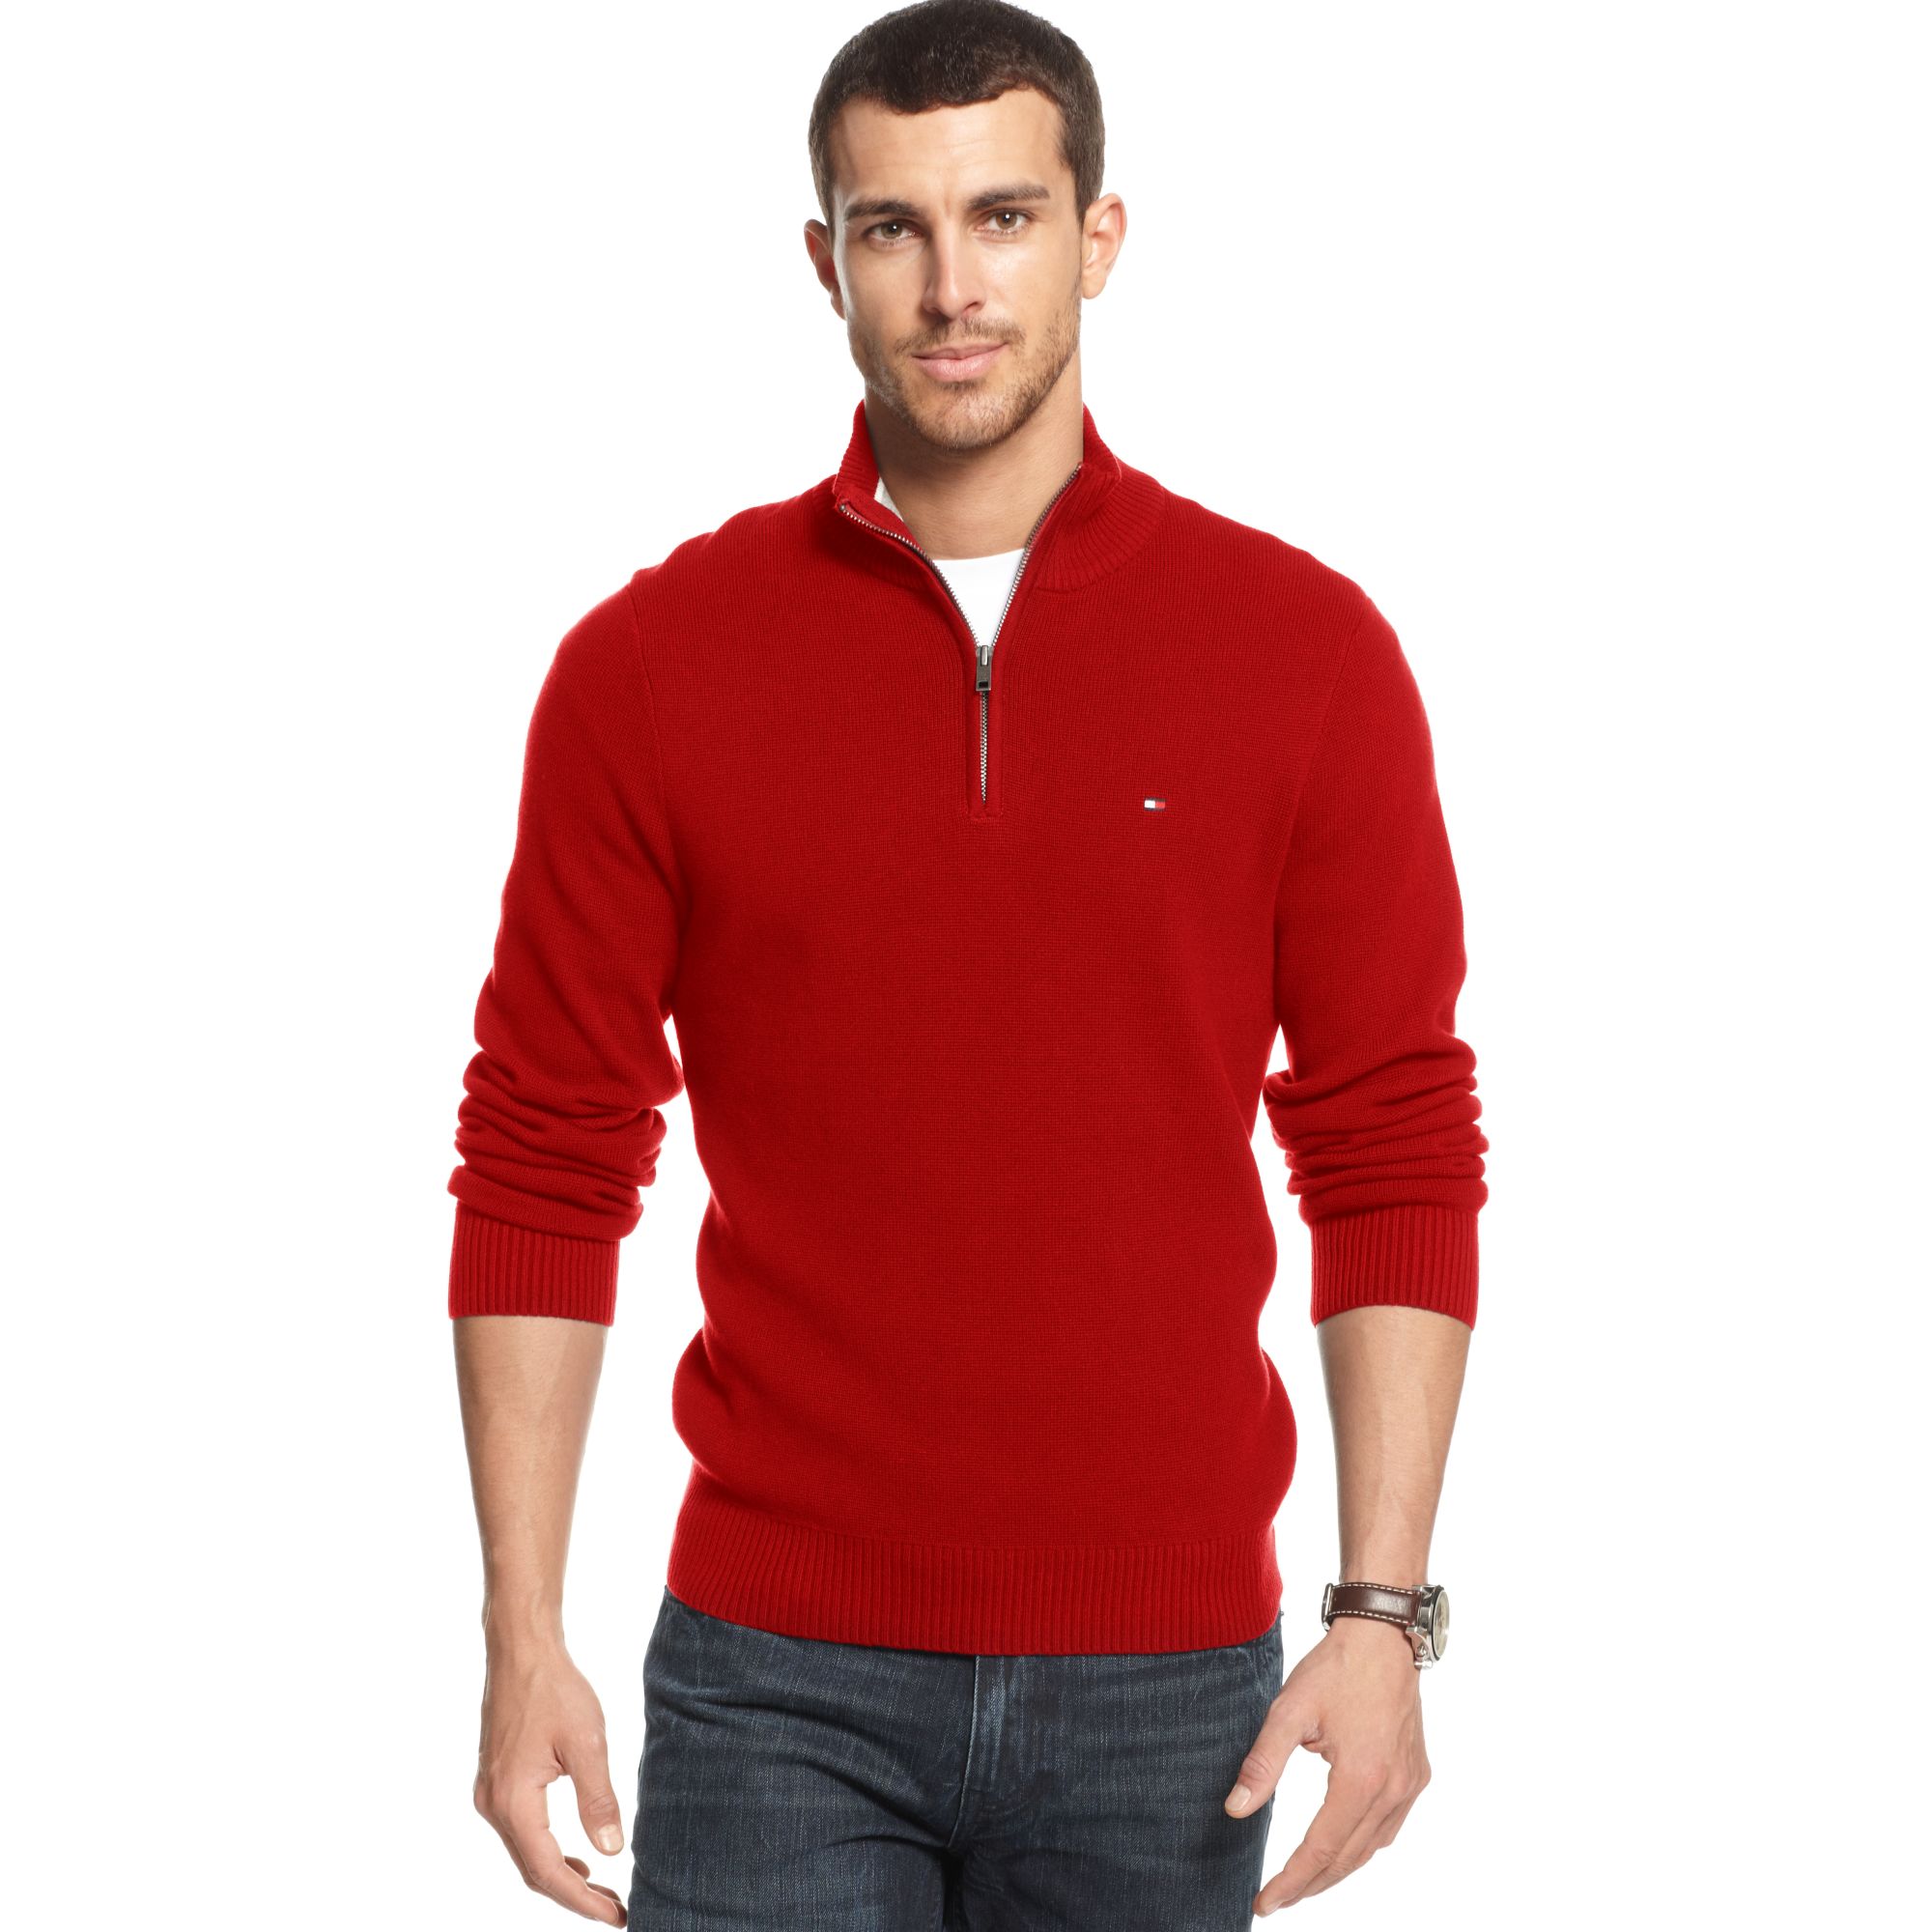 Tommy Hilfiger Red Sweater Sale, 54% OFF | www.smokymountains.org